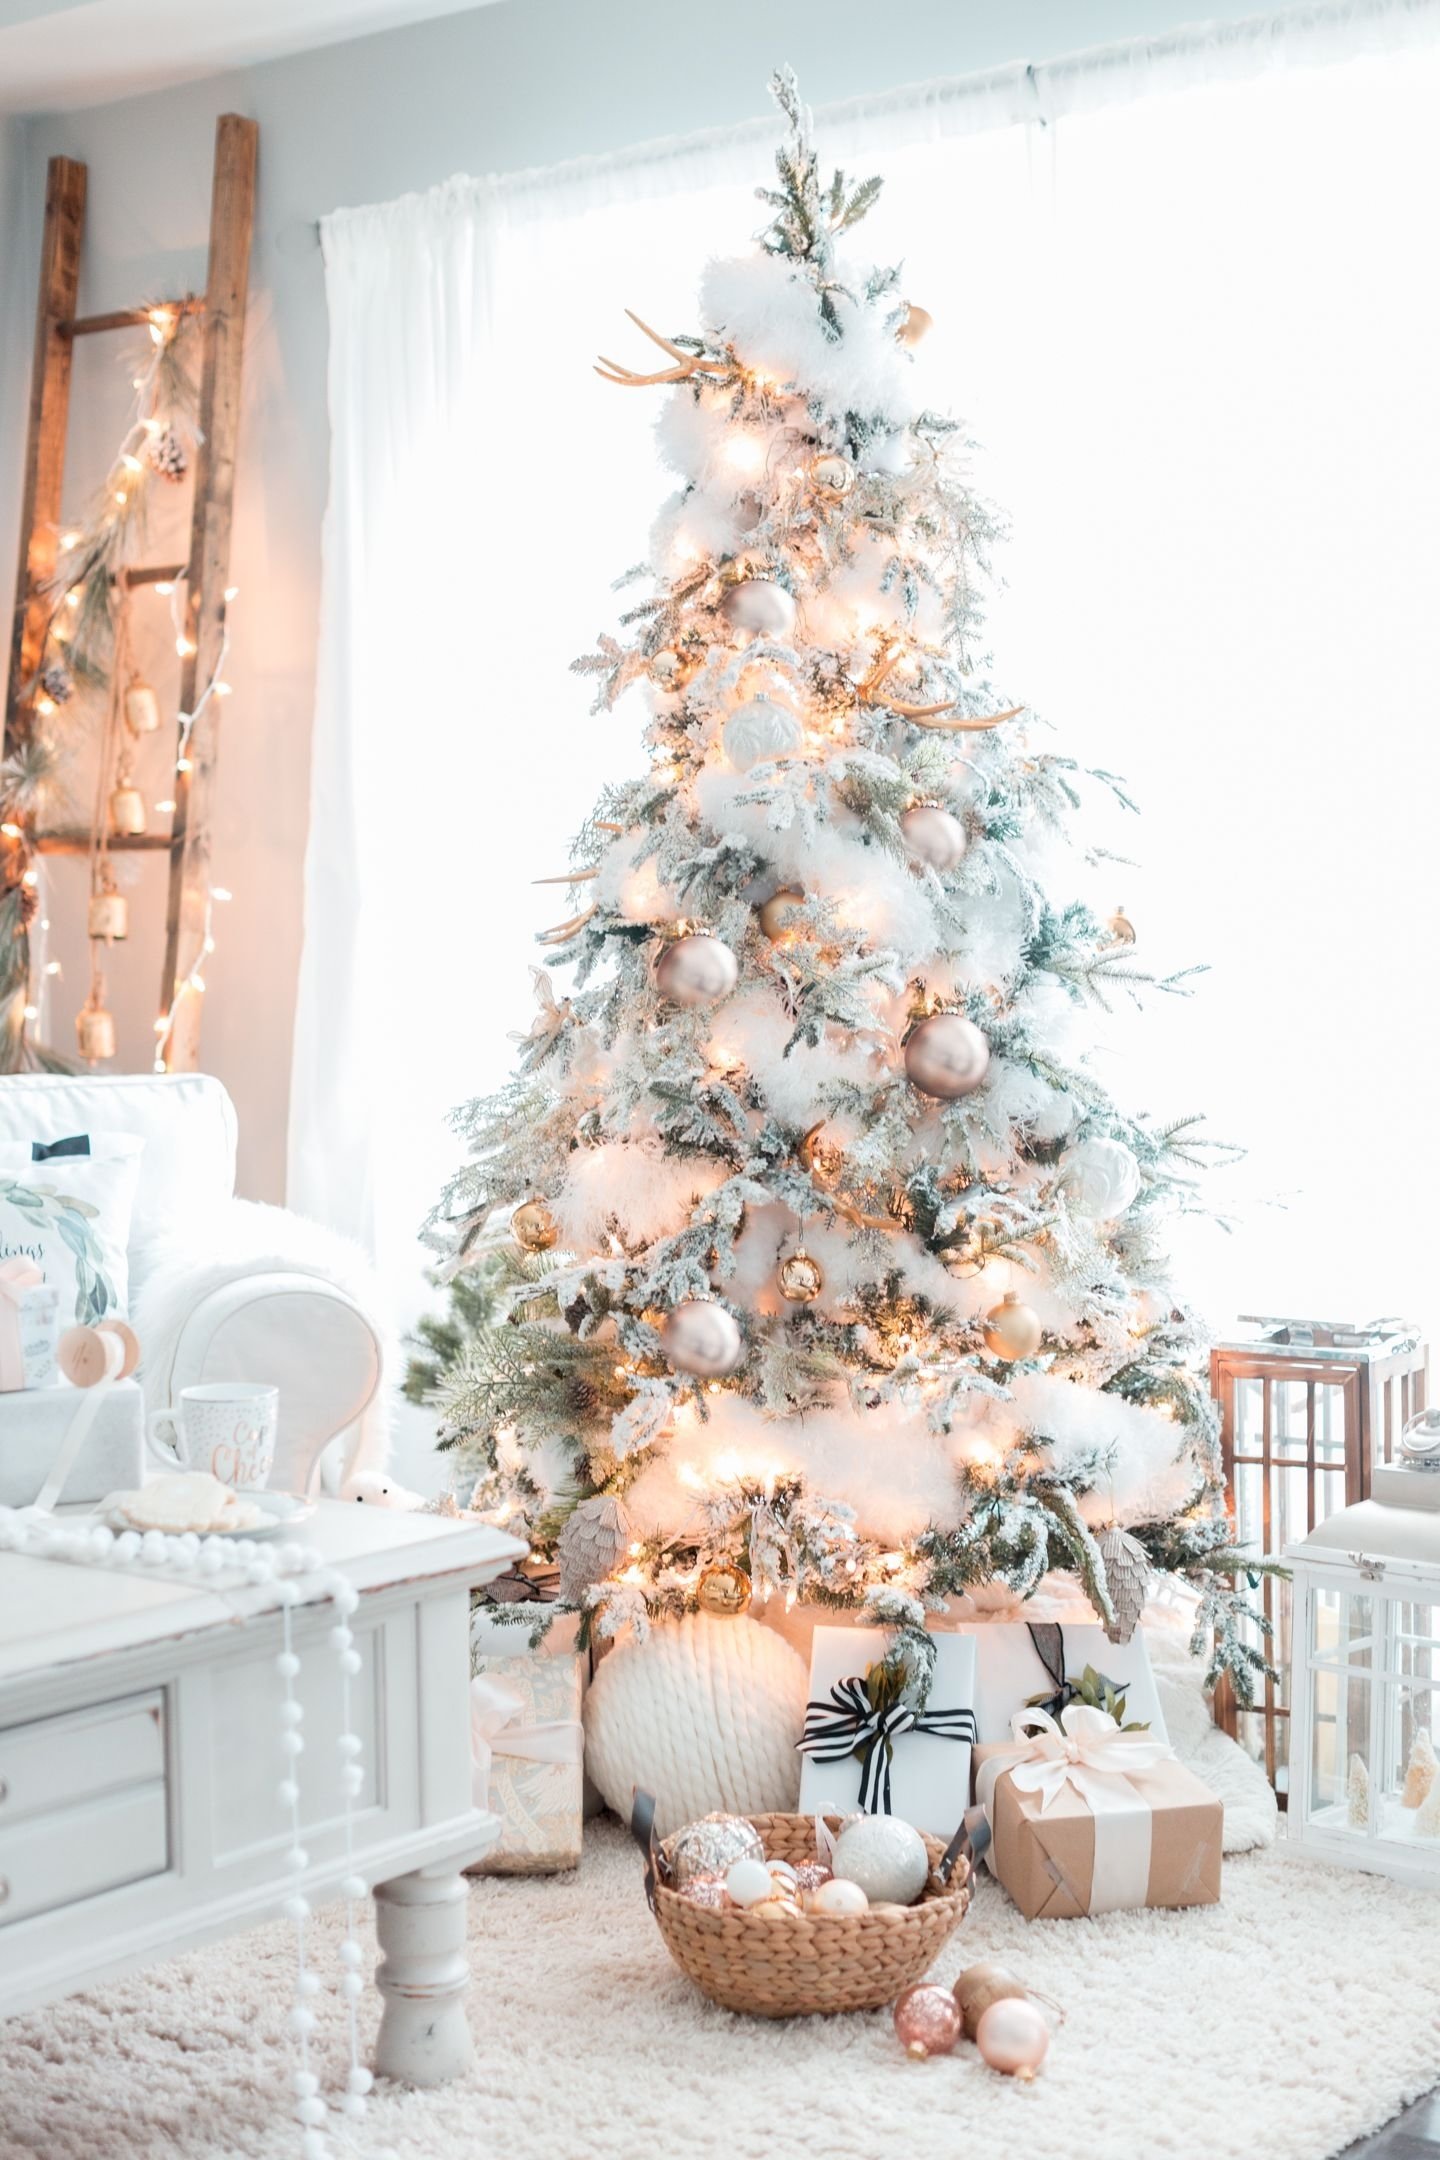 10 Attractive White Christmas Tree Decorating Ideas craftberry bush christmas home tour part 2 http www 2024